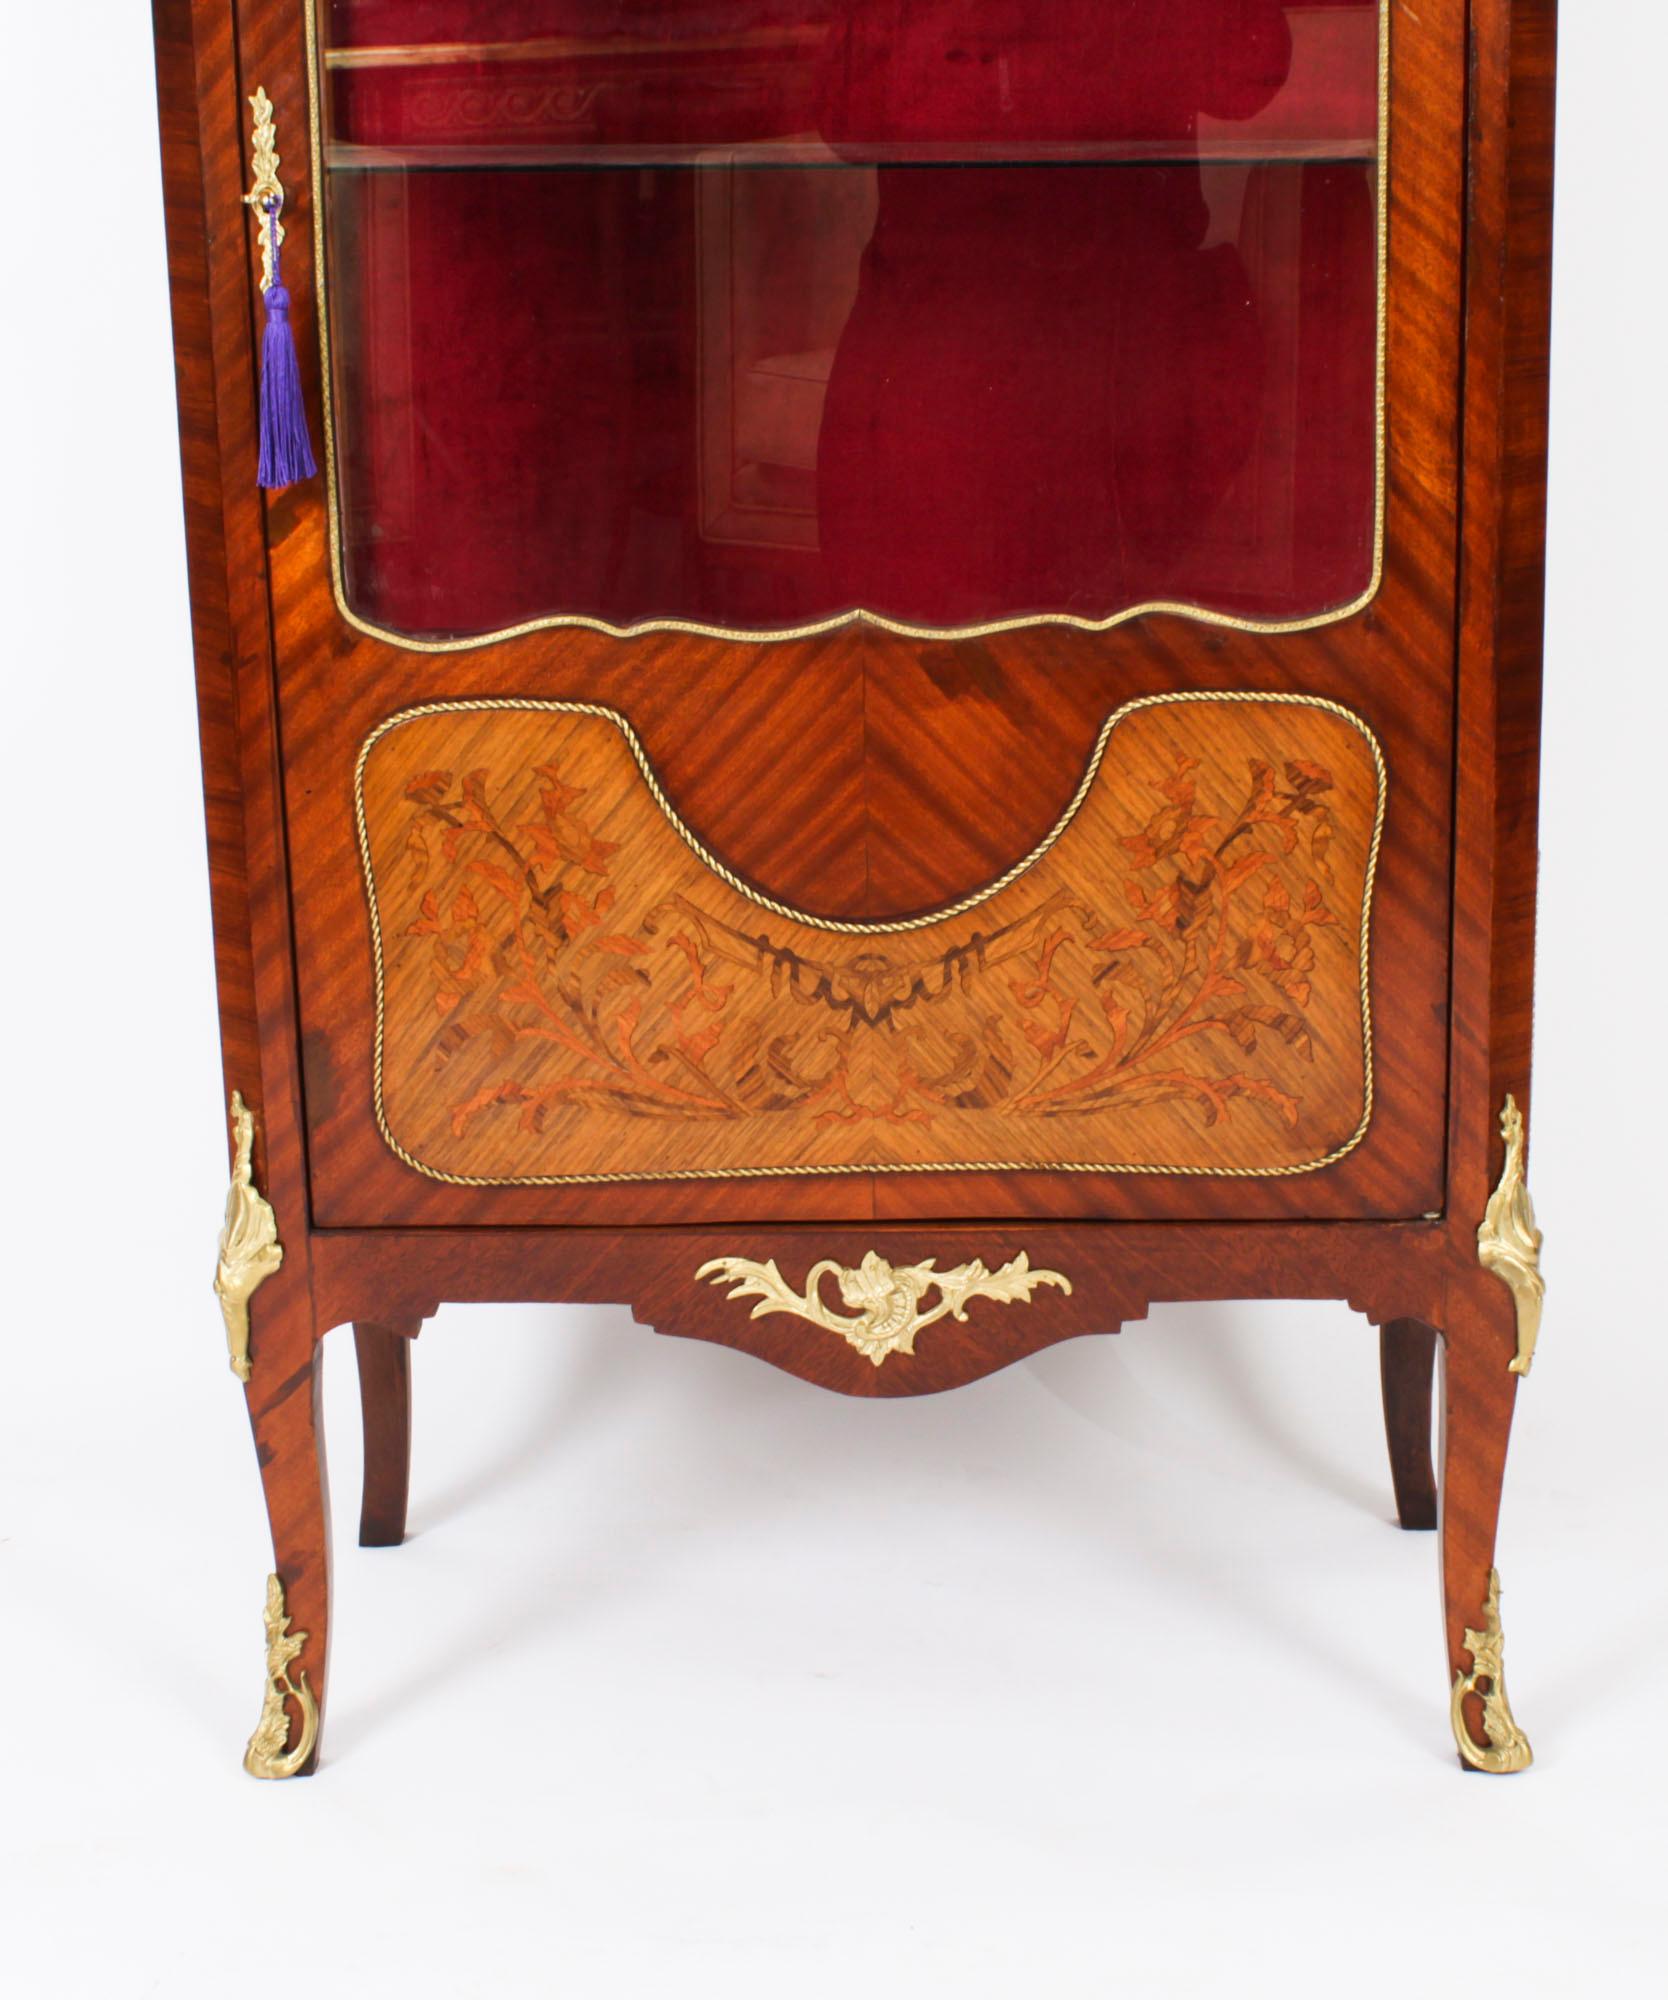 Antique French Ormolu Mounted Walnut Display Cabinet Circa 1920 For Sale 1